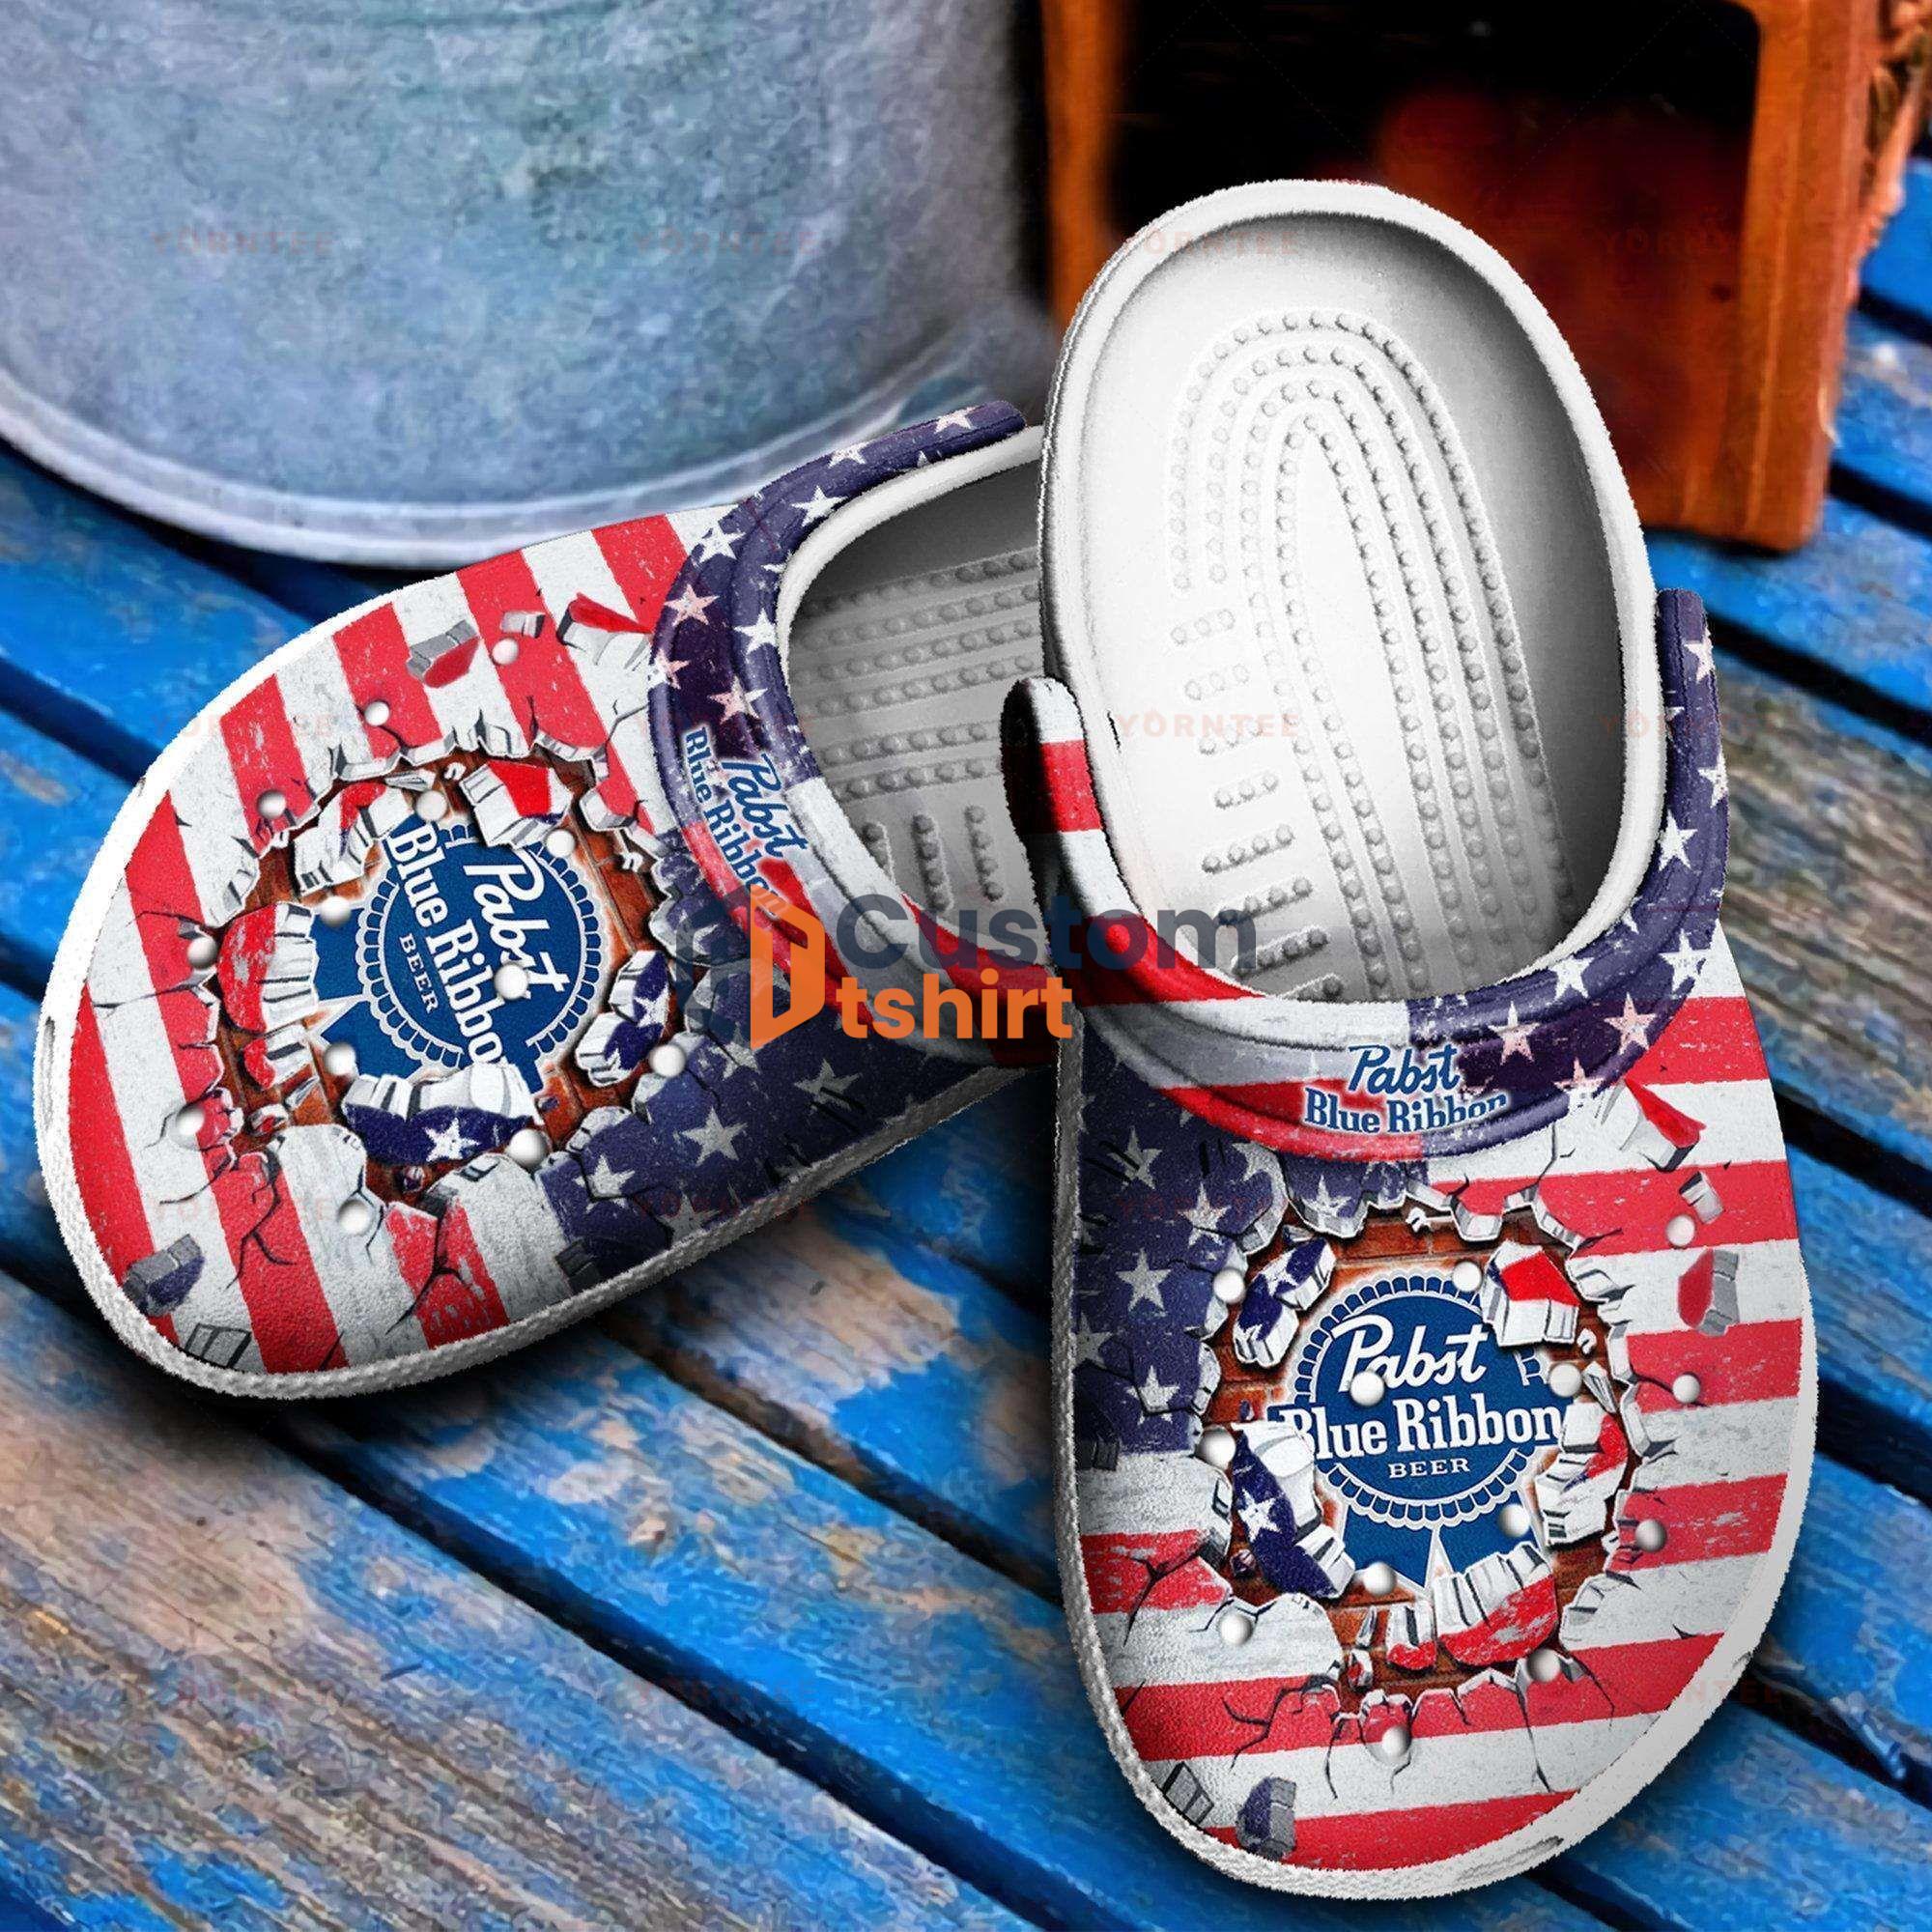 Pabst Ribbon Clog Shoes For Mens And Womens Product Photo 1 Product photo 1